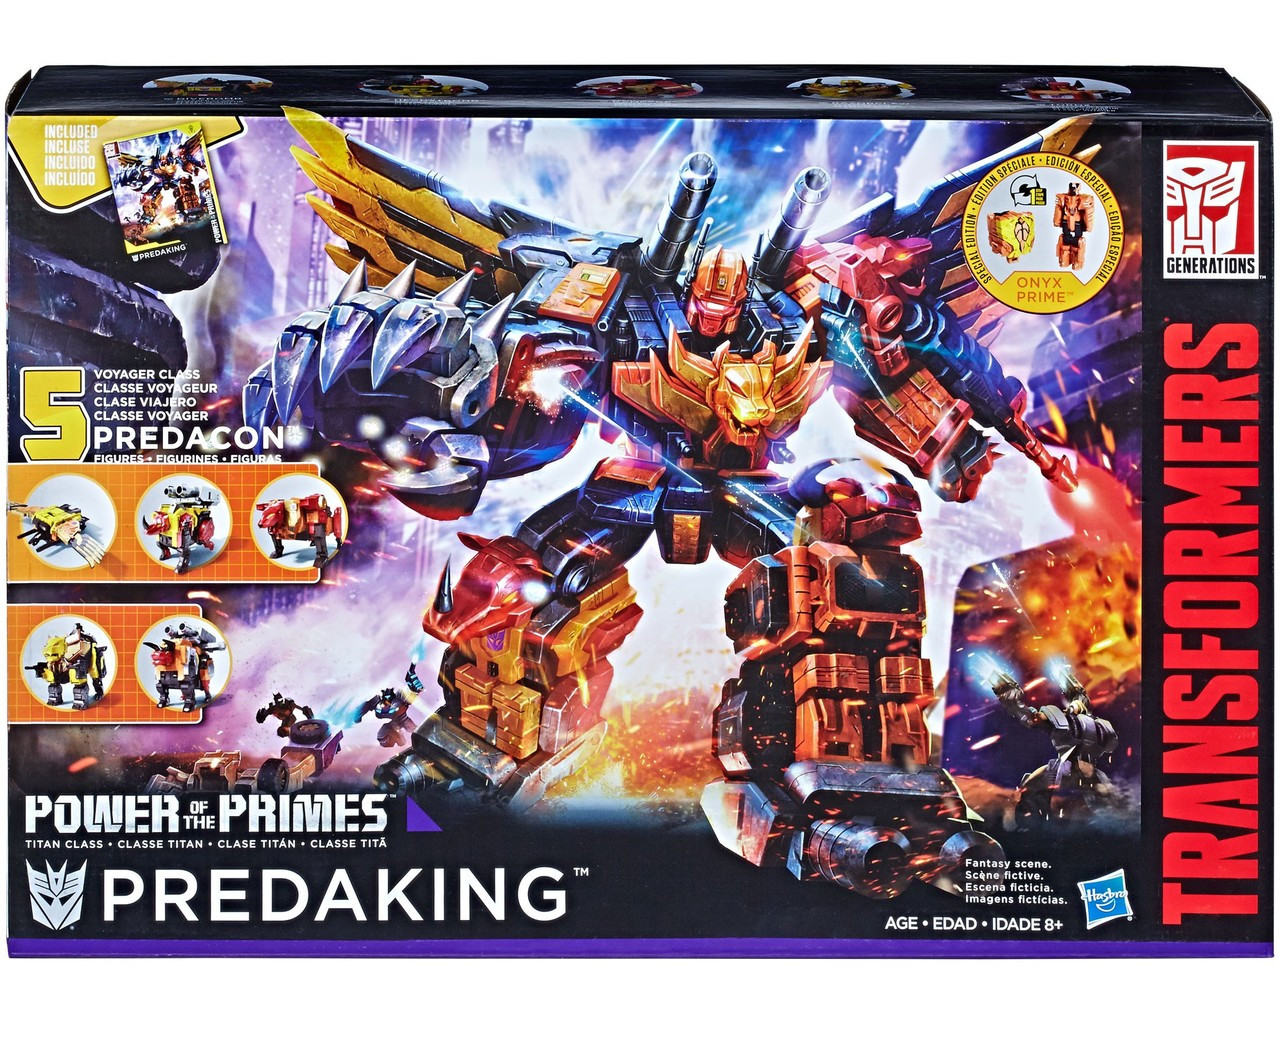 Transformers Generations Power Of The Primes Predaking Titan Action Figure Divebomb Headstrong Rampage Razorclaw Torox Hasbro Toys Toywiz - roblox headstrong